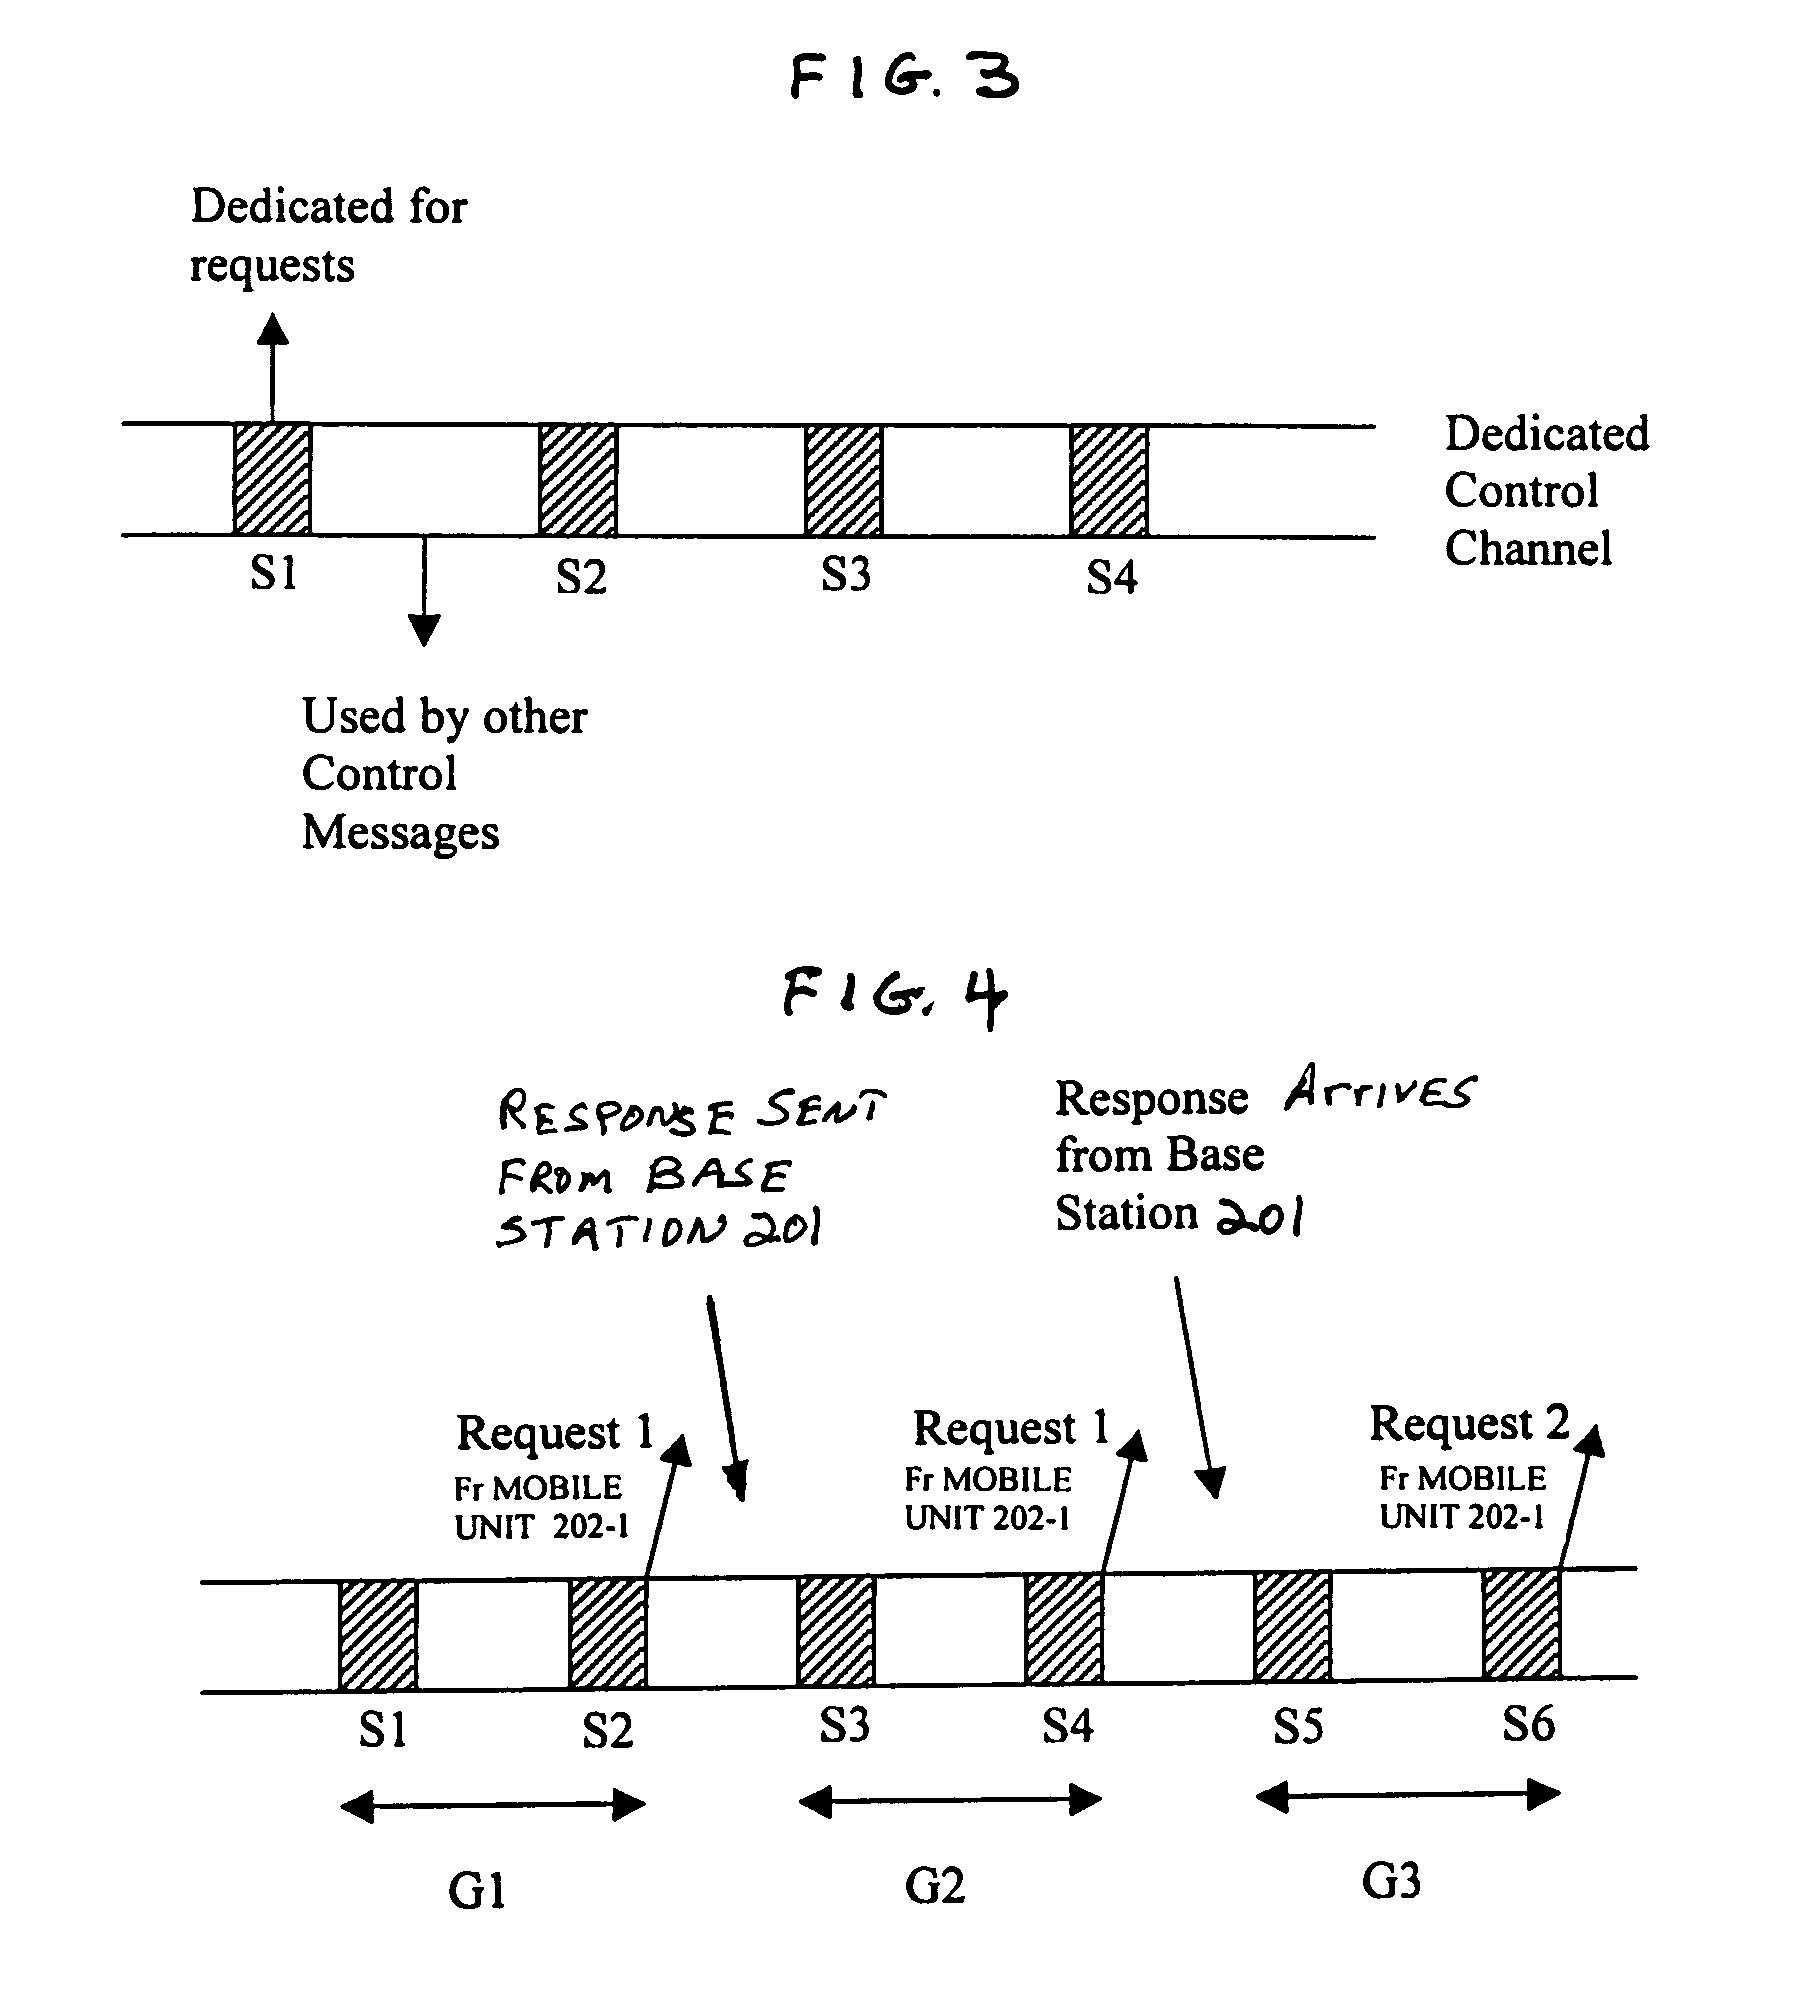 Apparatus and method for acquiring an uplink traffic channel, in wireless communications systems